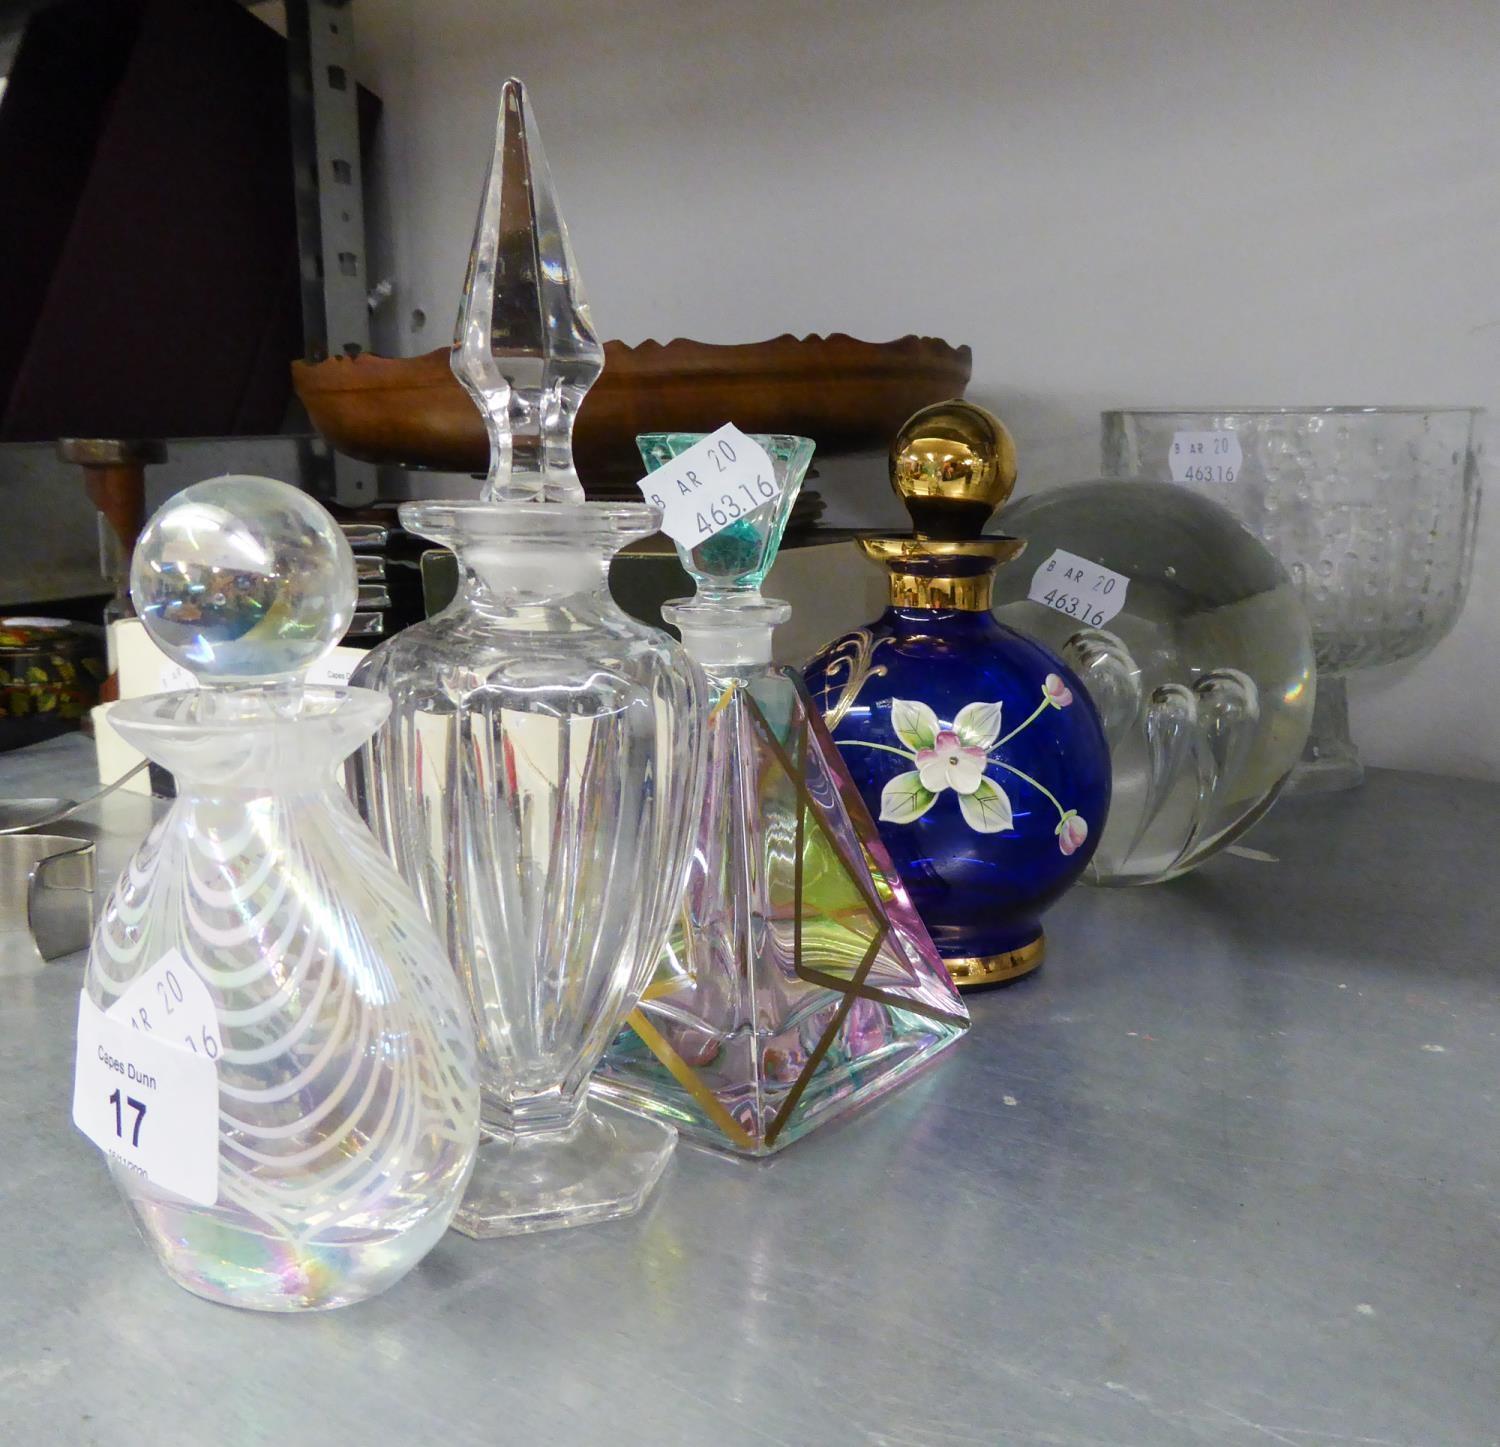 FOUR DECORATIVE GLASS PERFUME BOTTLES WITH ORNATE STOPPERS;  A ?PARLANE? LARGE GLASS GLOBULAR DOOR